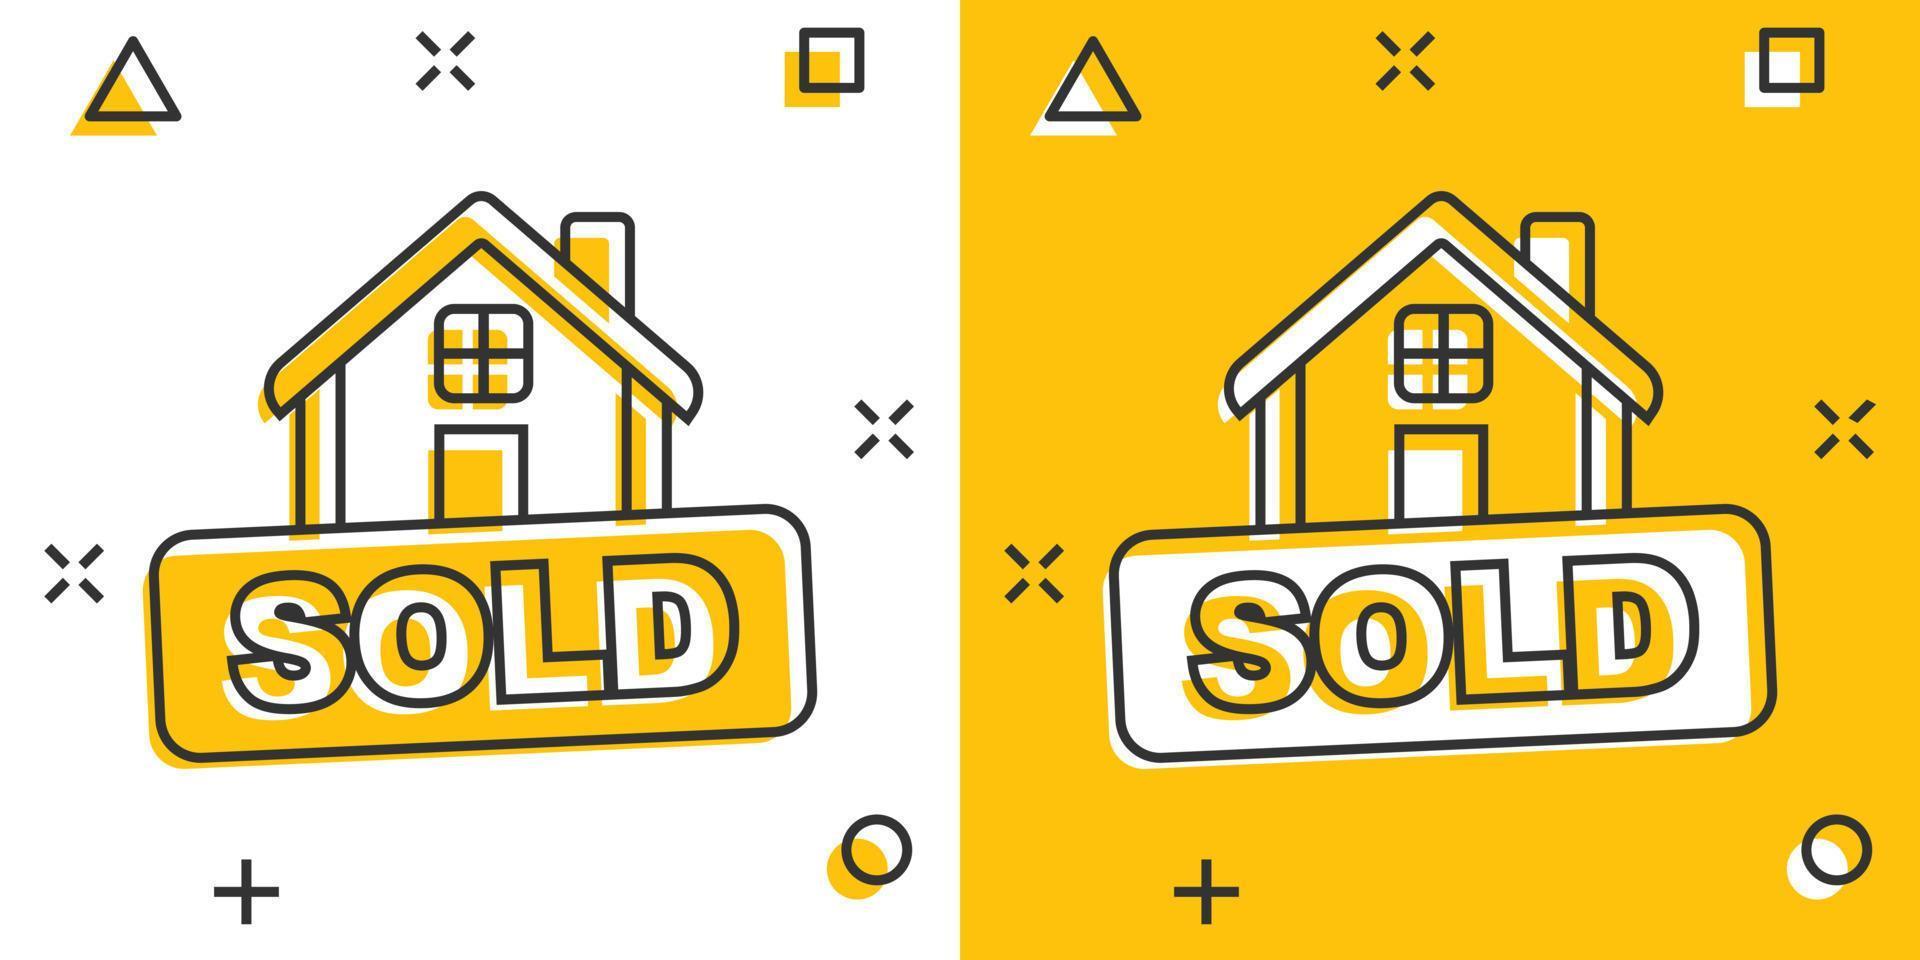 Cartoon sold house icon in comic style. Home illustration pictogram. Sale sign splash business concept. vector